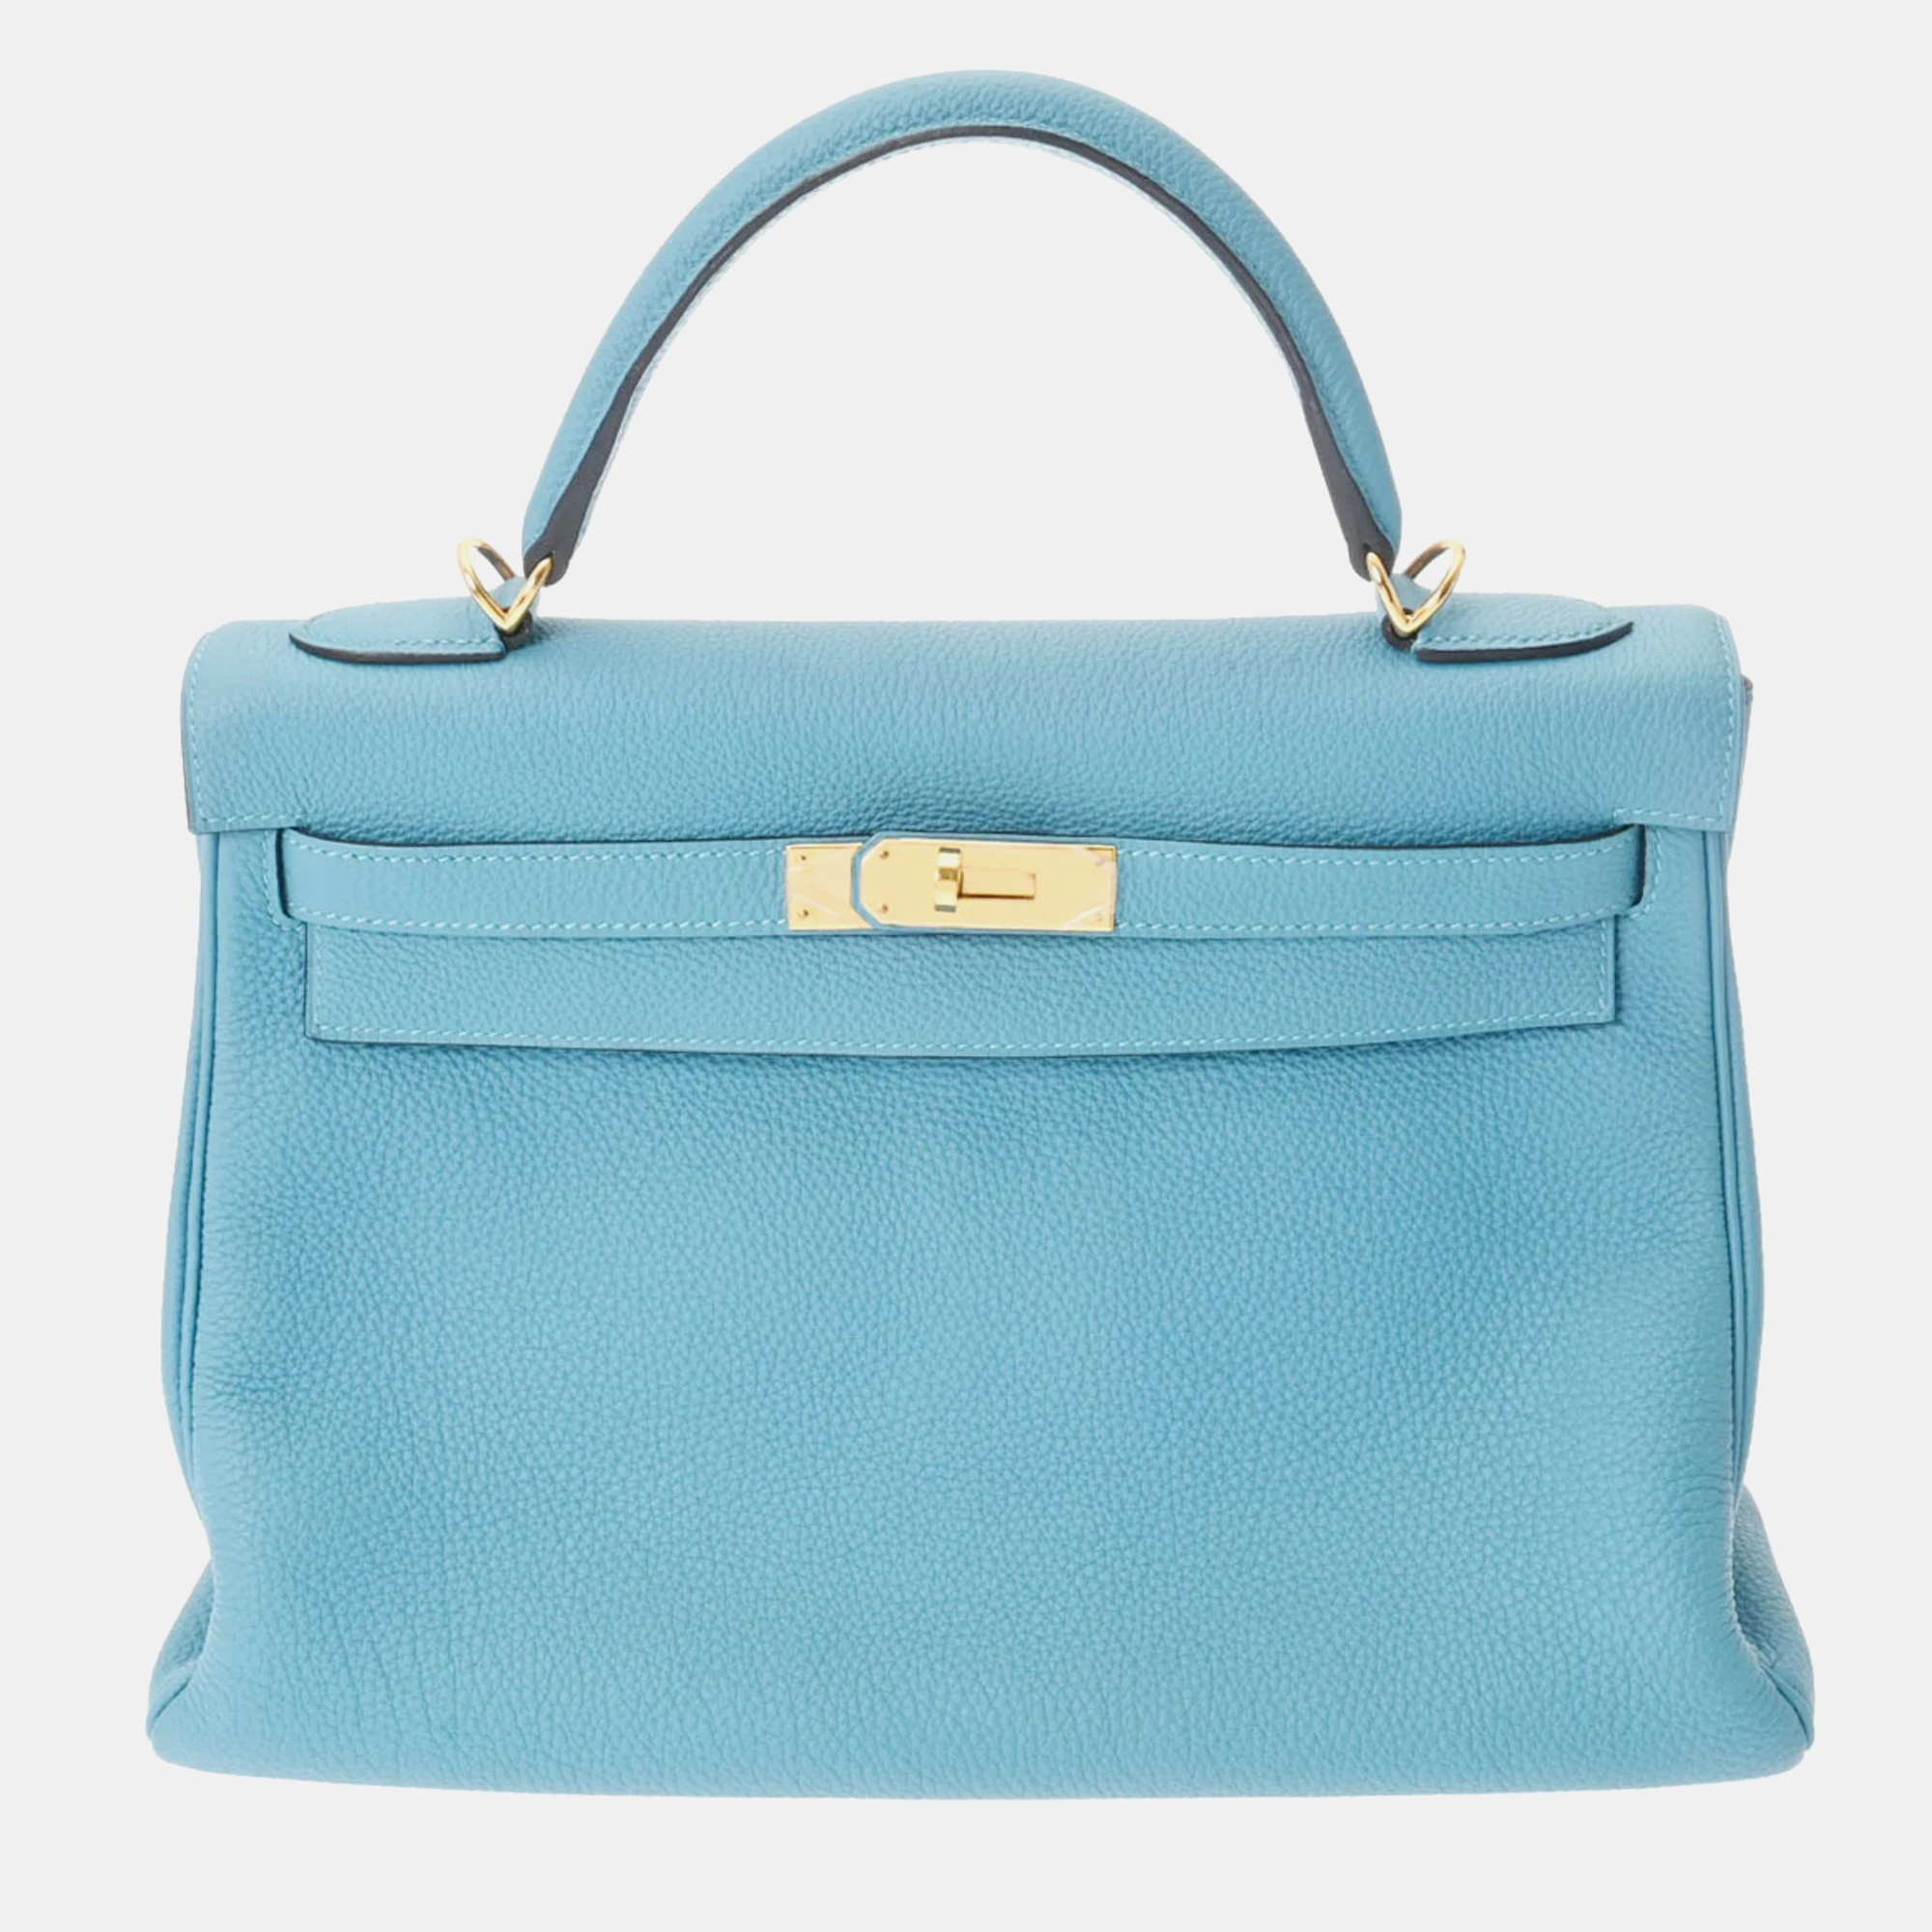 Pre-owned Hermes Kelly 32 Inner Stitch Turquoise R Stamp (around 2014) Ladies Togo Bag In Blue